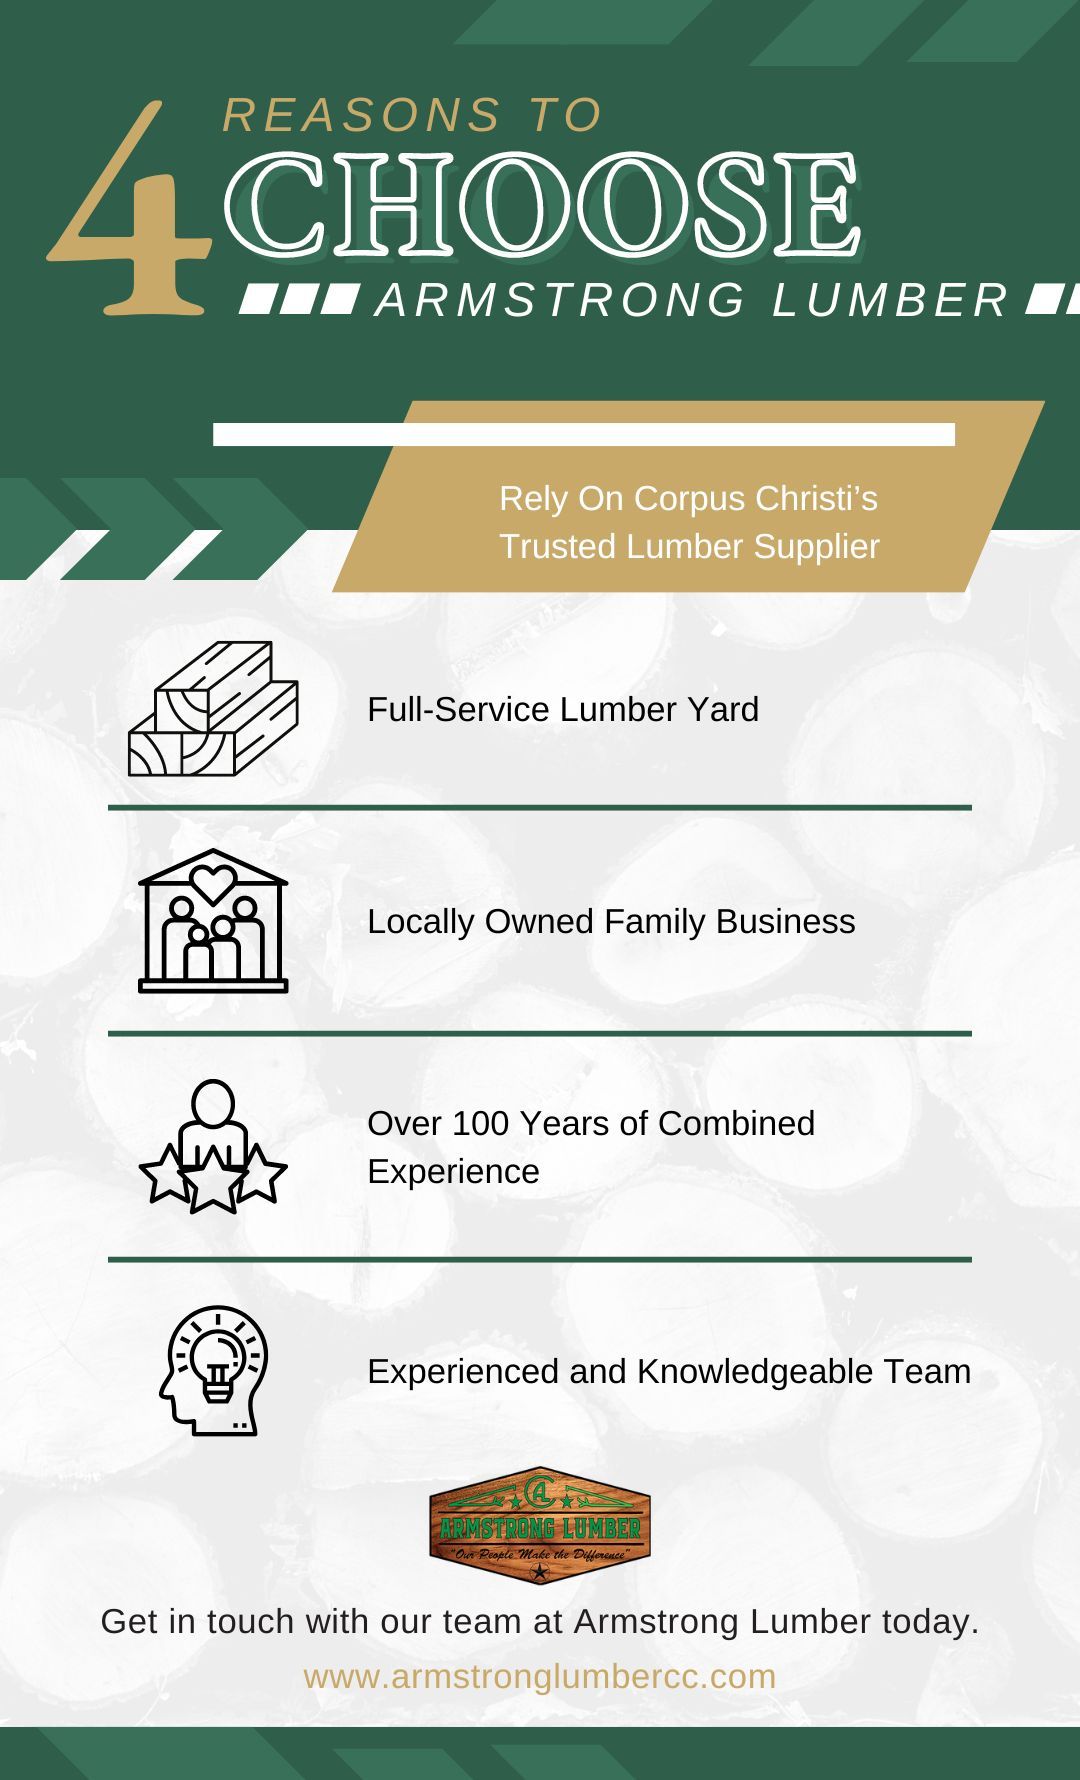 M33903 - Armstrong Lumber - 4 Reasons to Choose Armstrong Lumber - Infographic.jpg